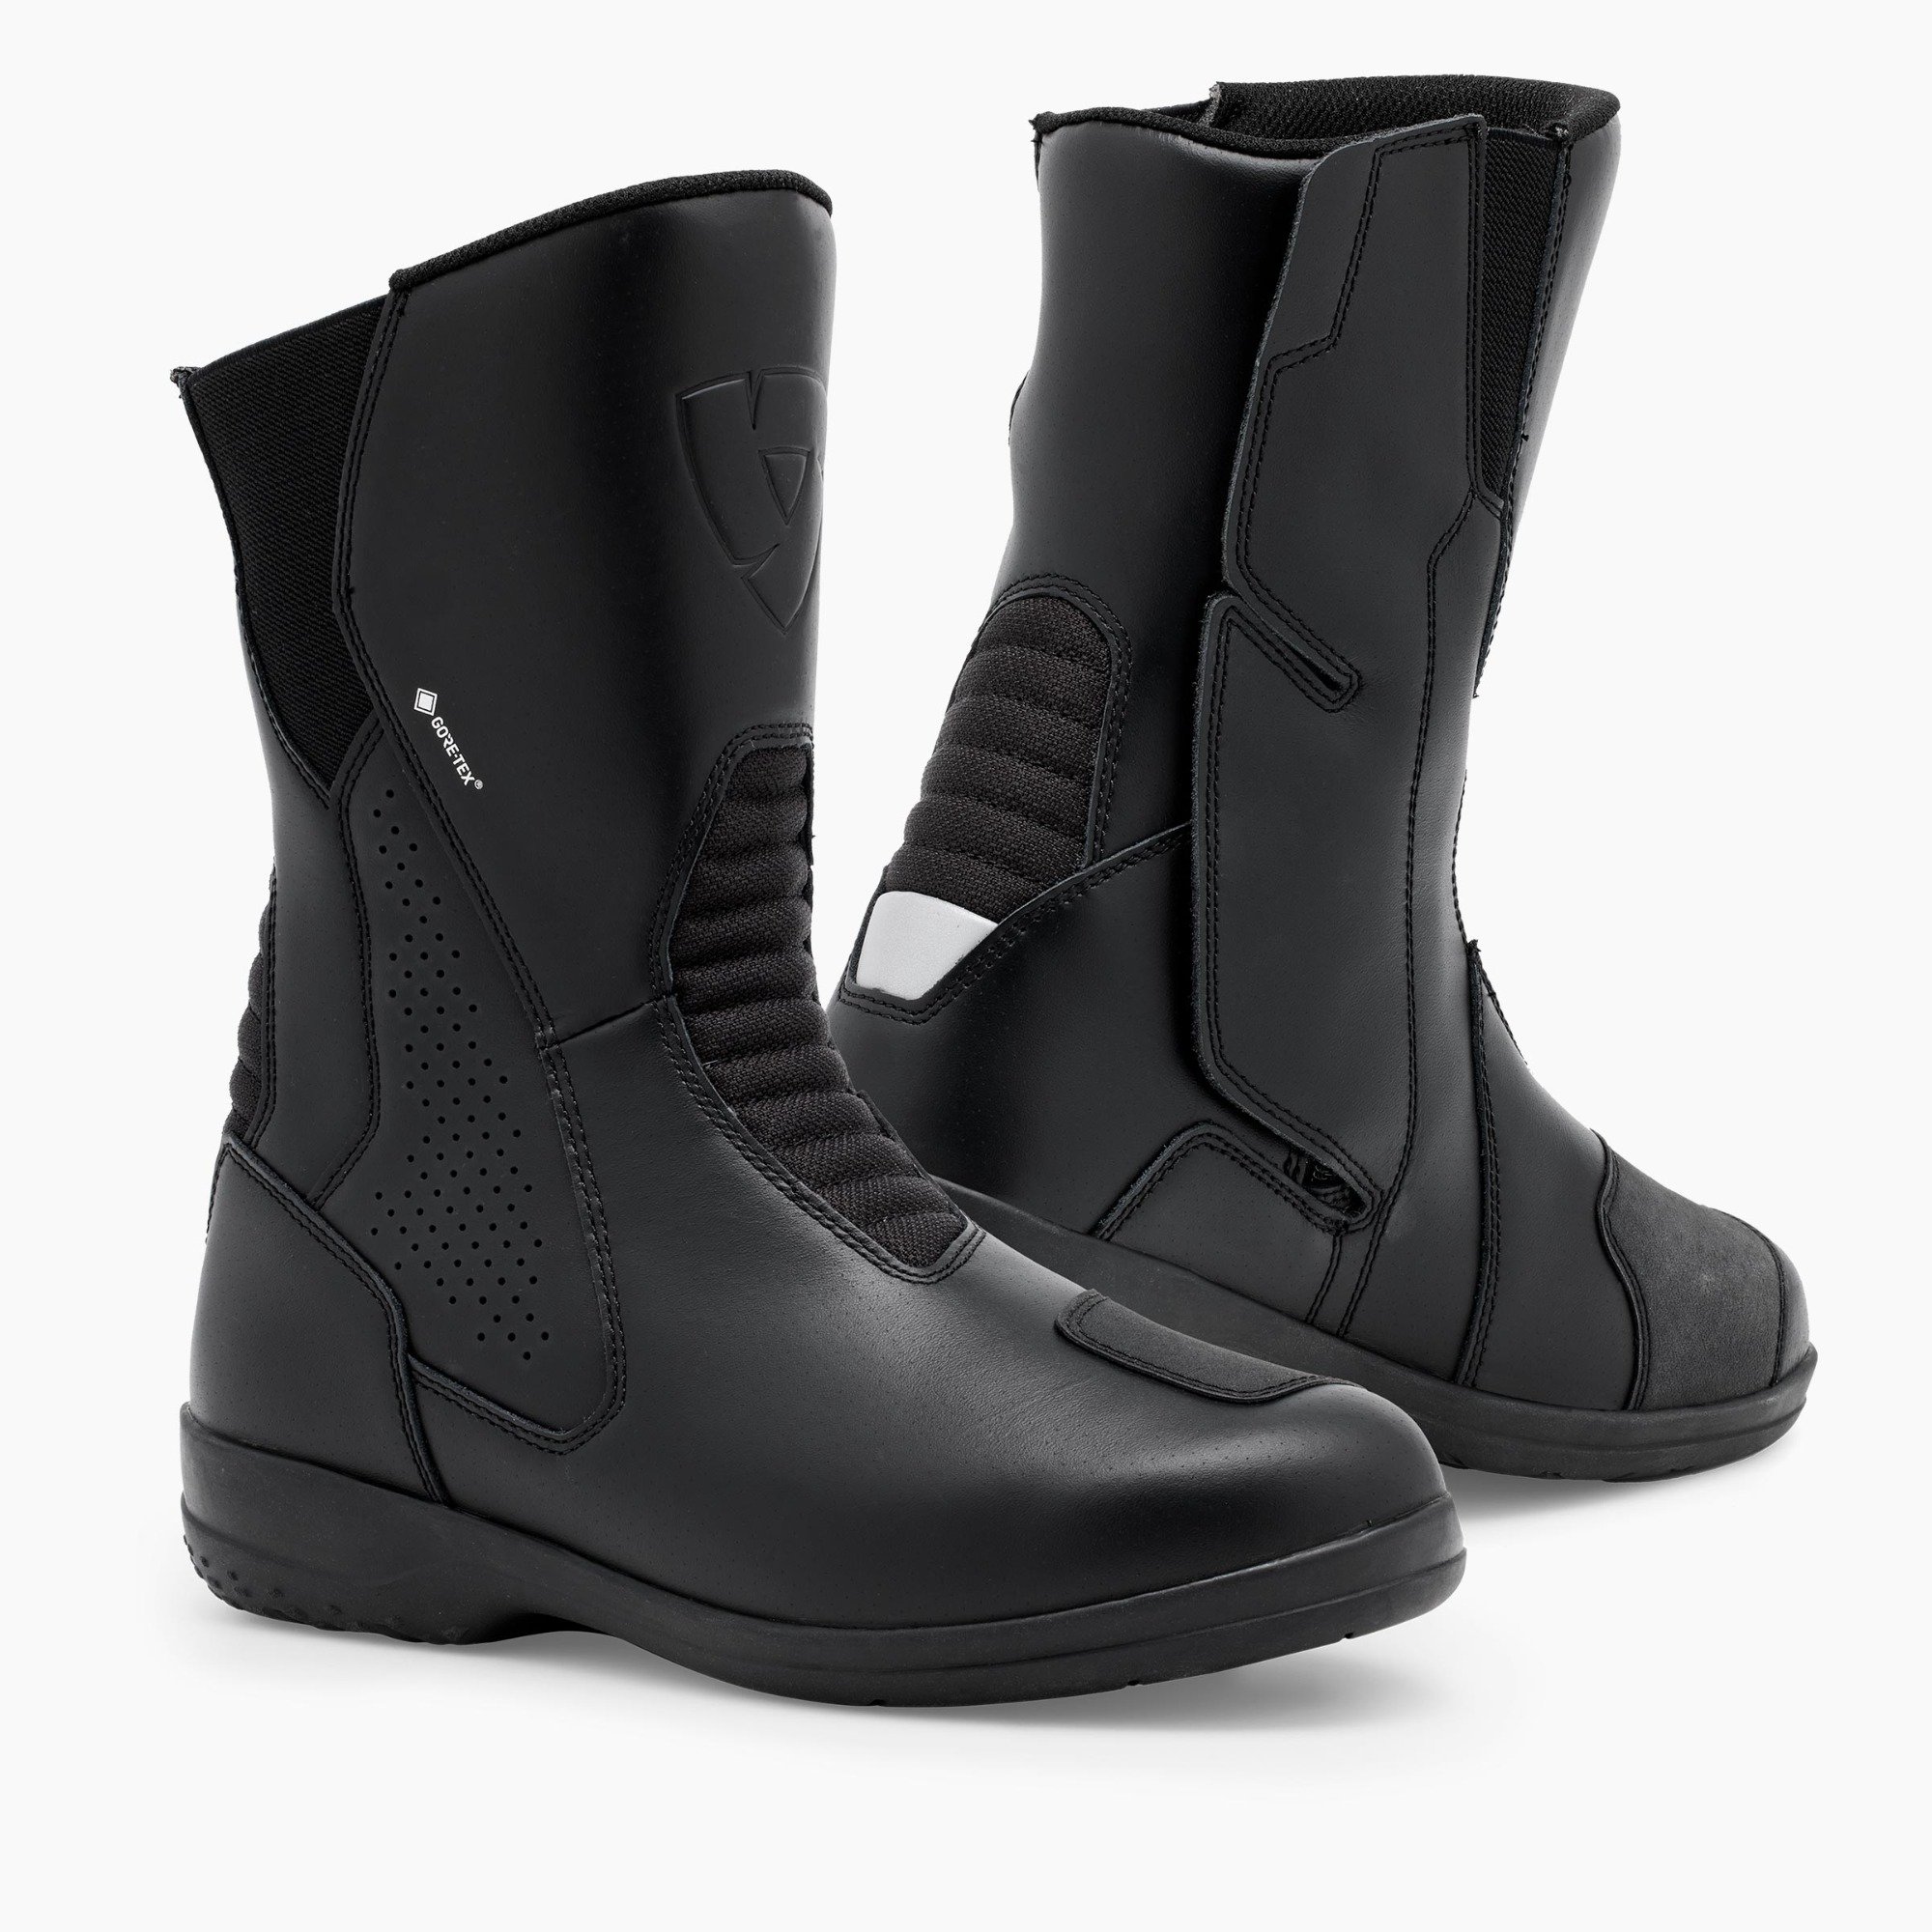 Image of REV'IT! Arena GTX Boots Lady Black Size 37 ID 8700001356978